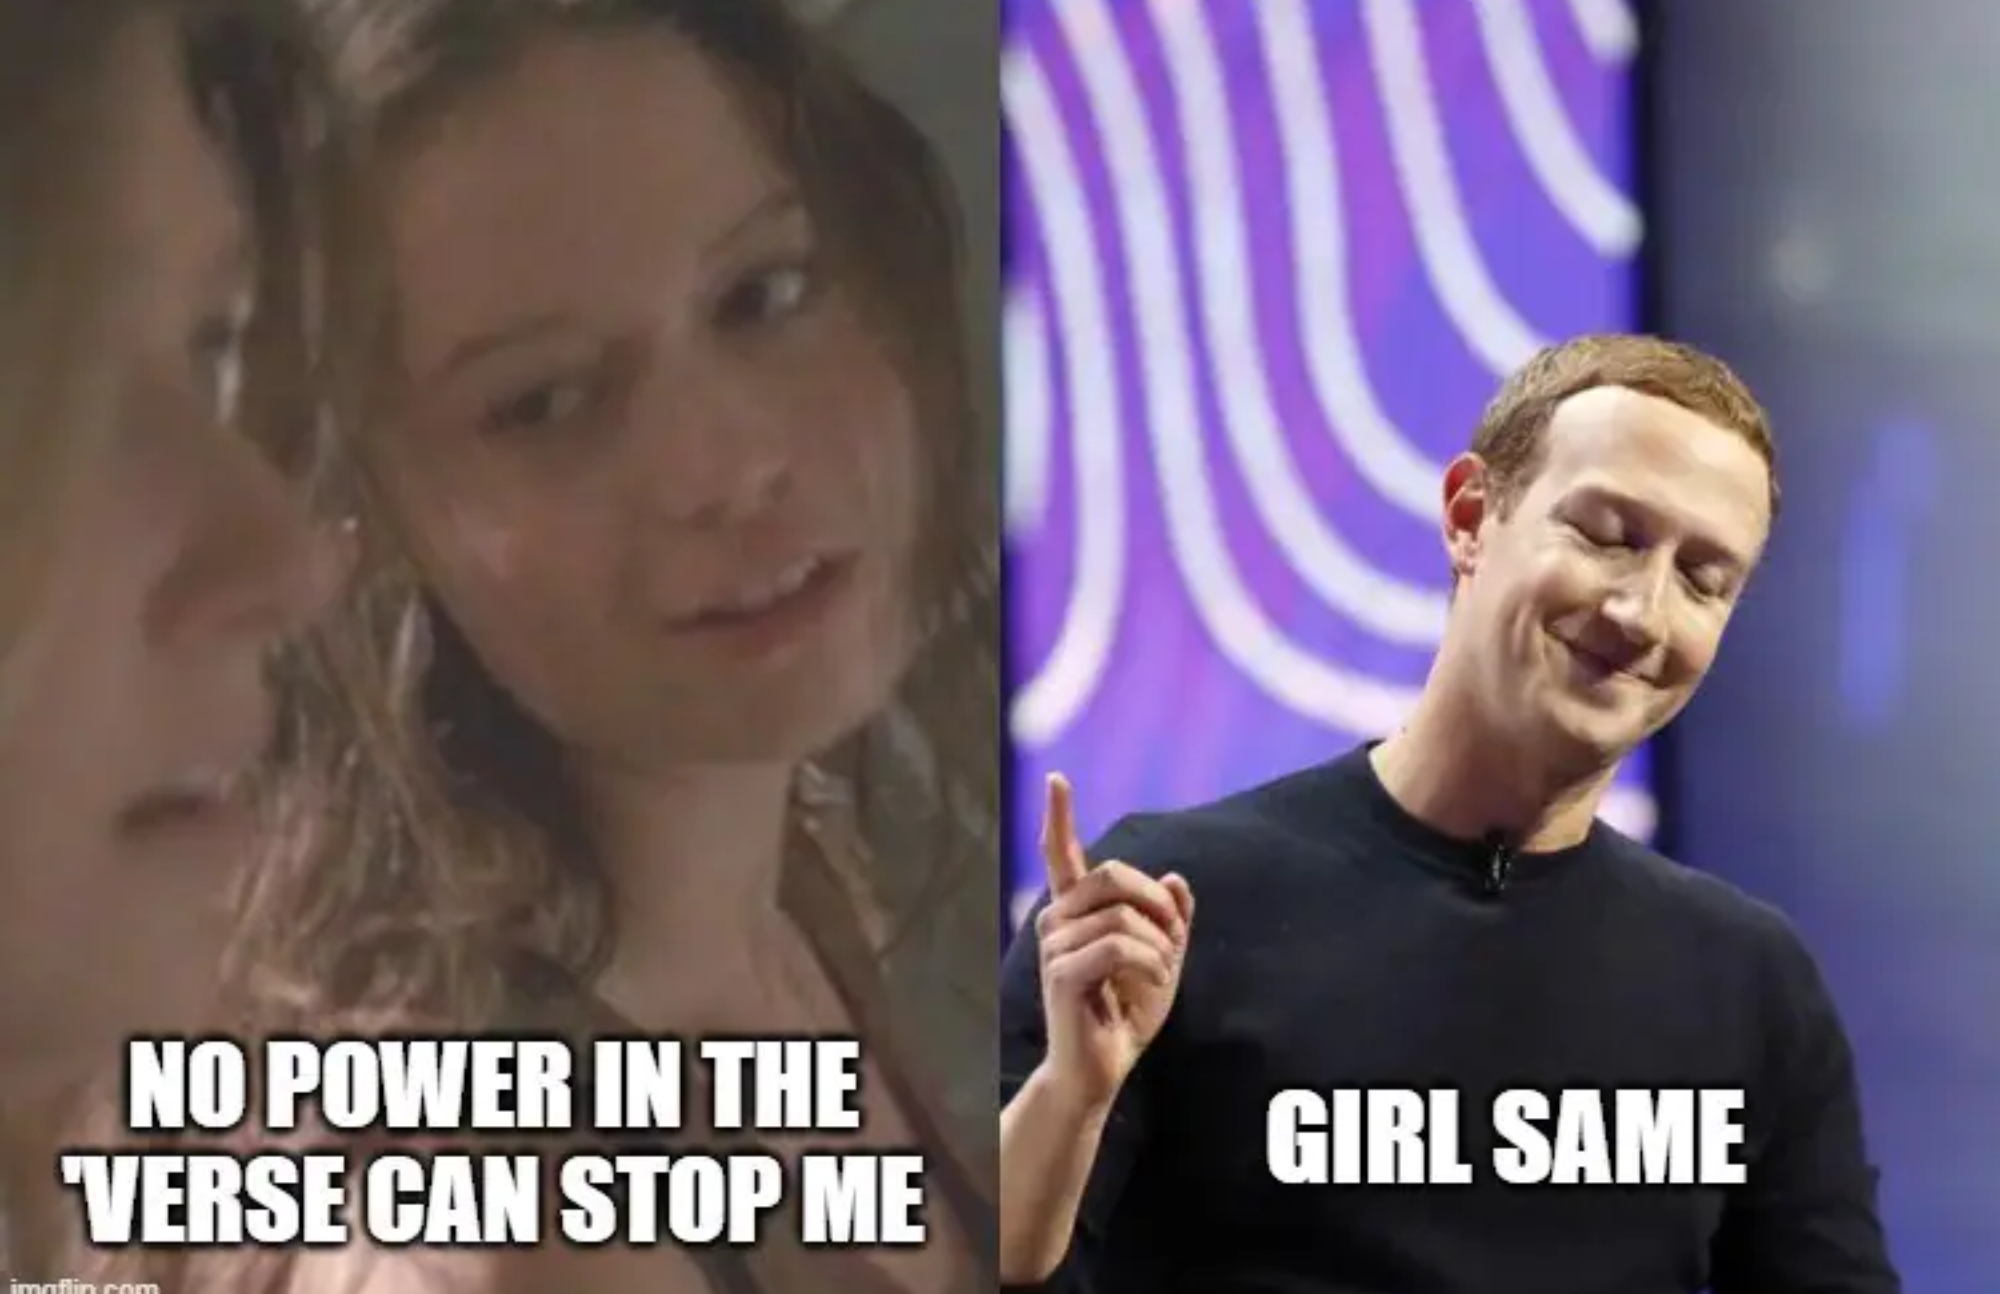 Mark Zuckerberg tells what a woman says to her friend and responds, "girl same"